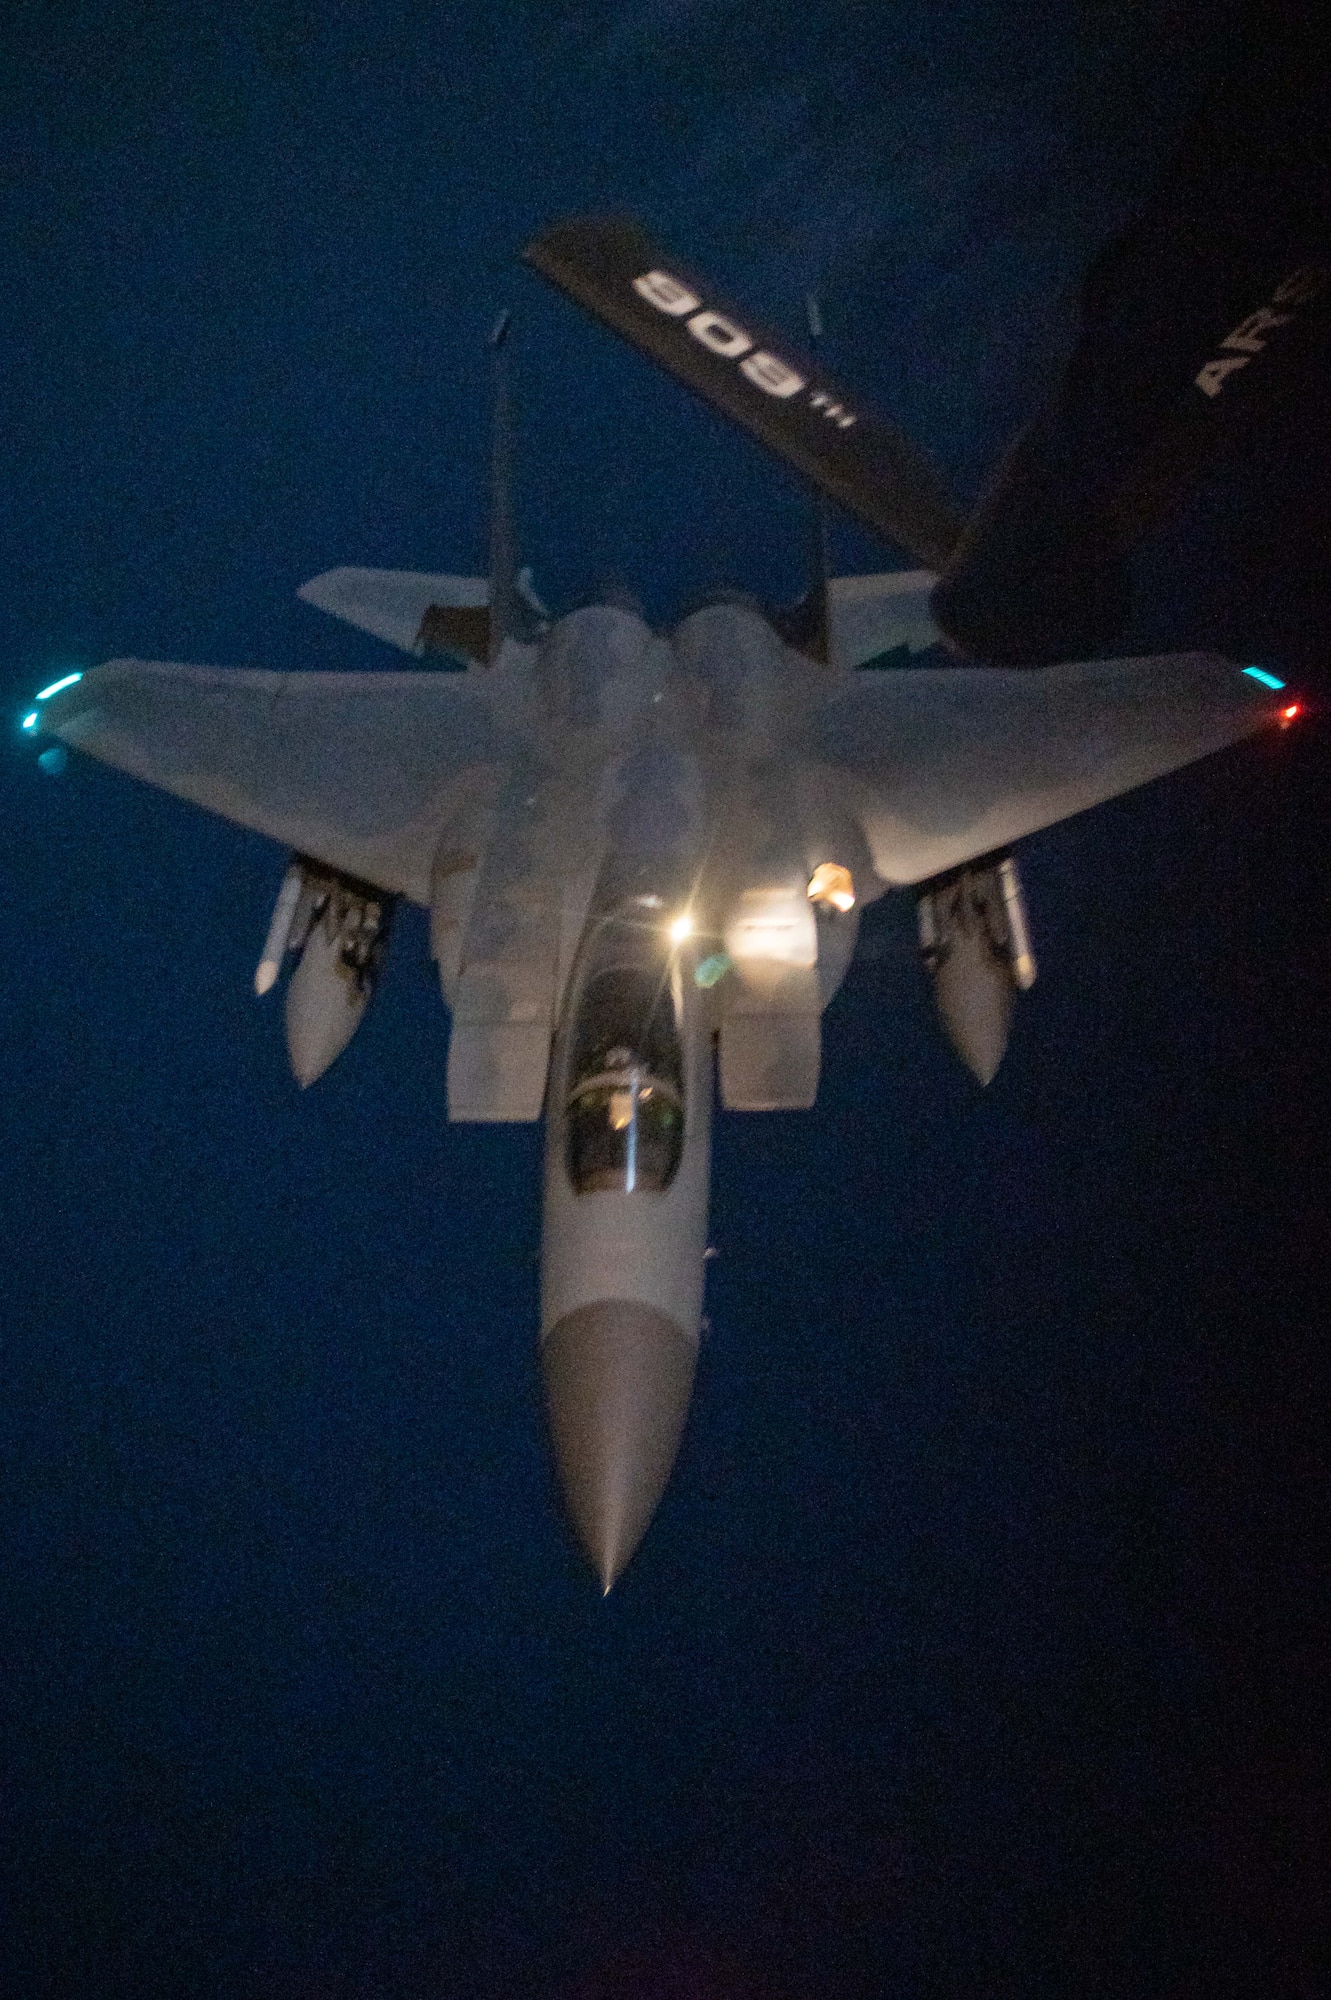 A fighter jet flies underneath a refueling plane at night